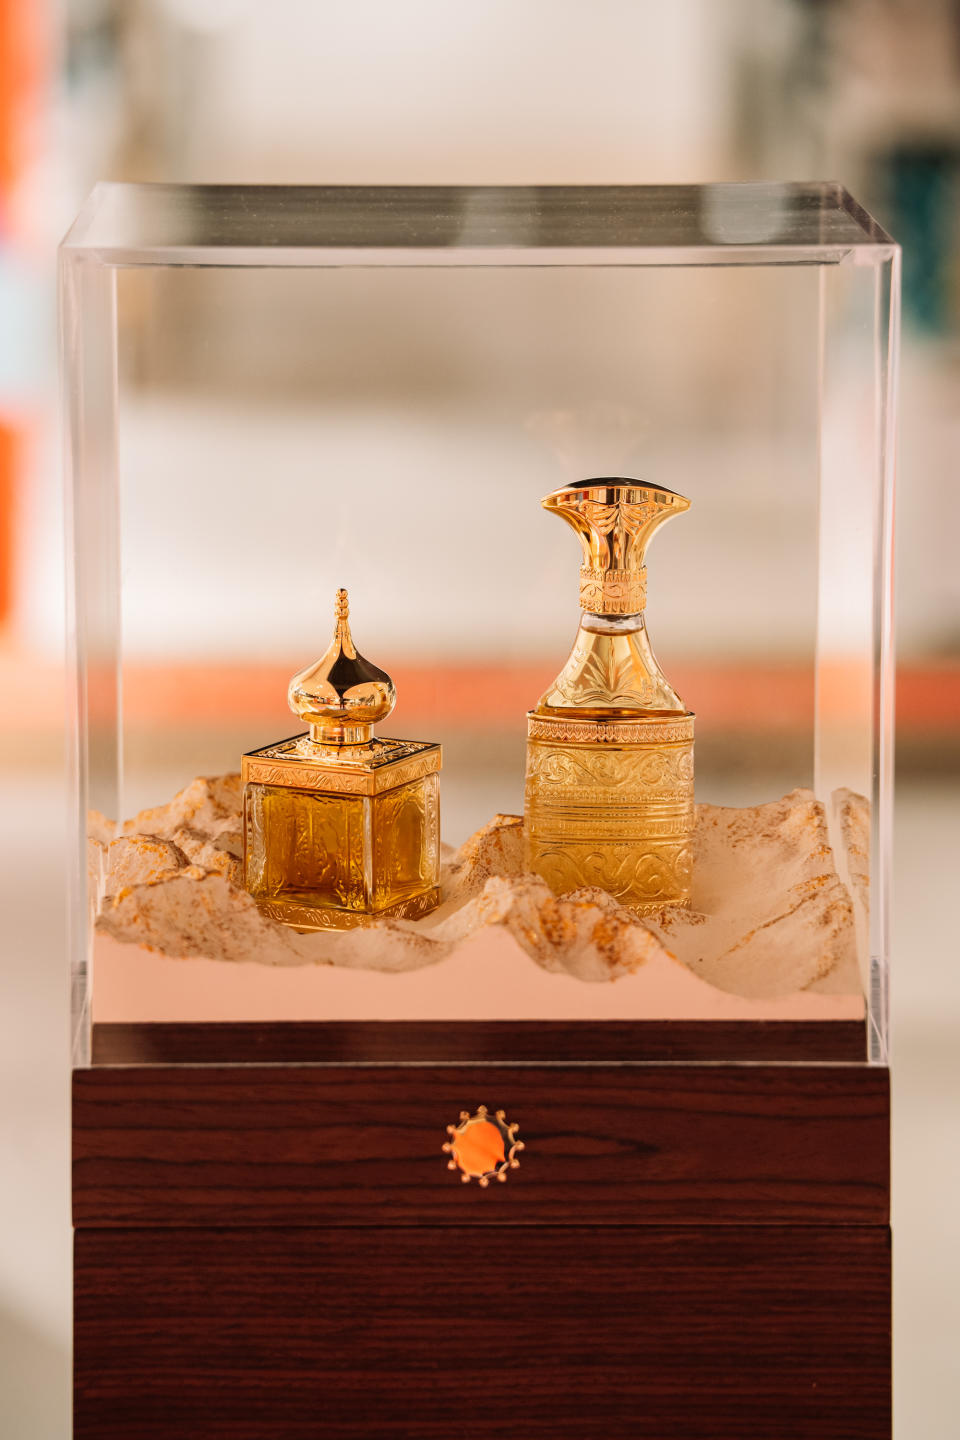 Amouage's Cristal & Gold 2023 limited-edition fragrances showcased at the Rinascente Beauty Fair in Milan.